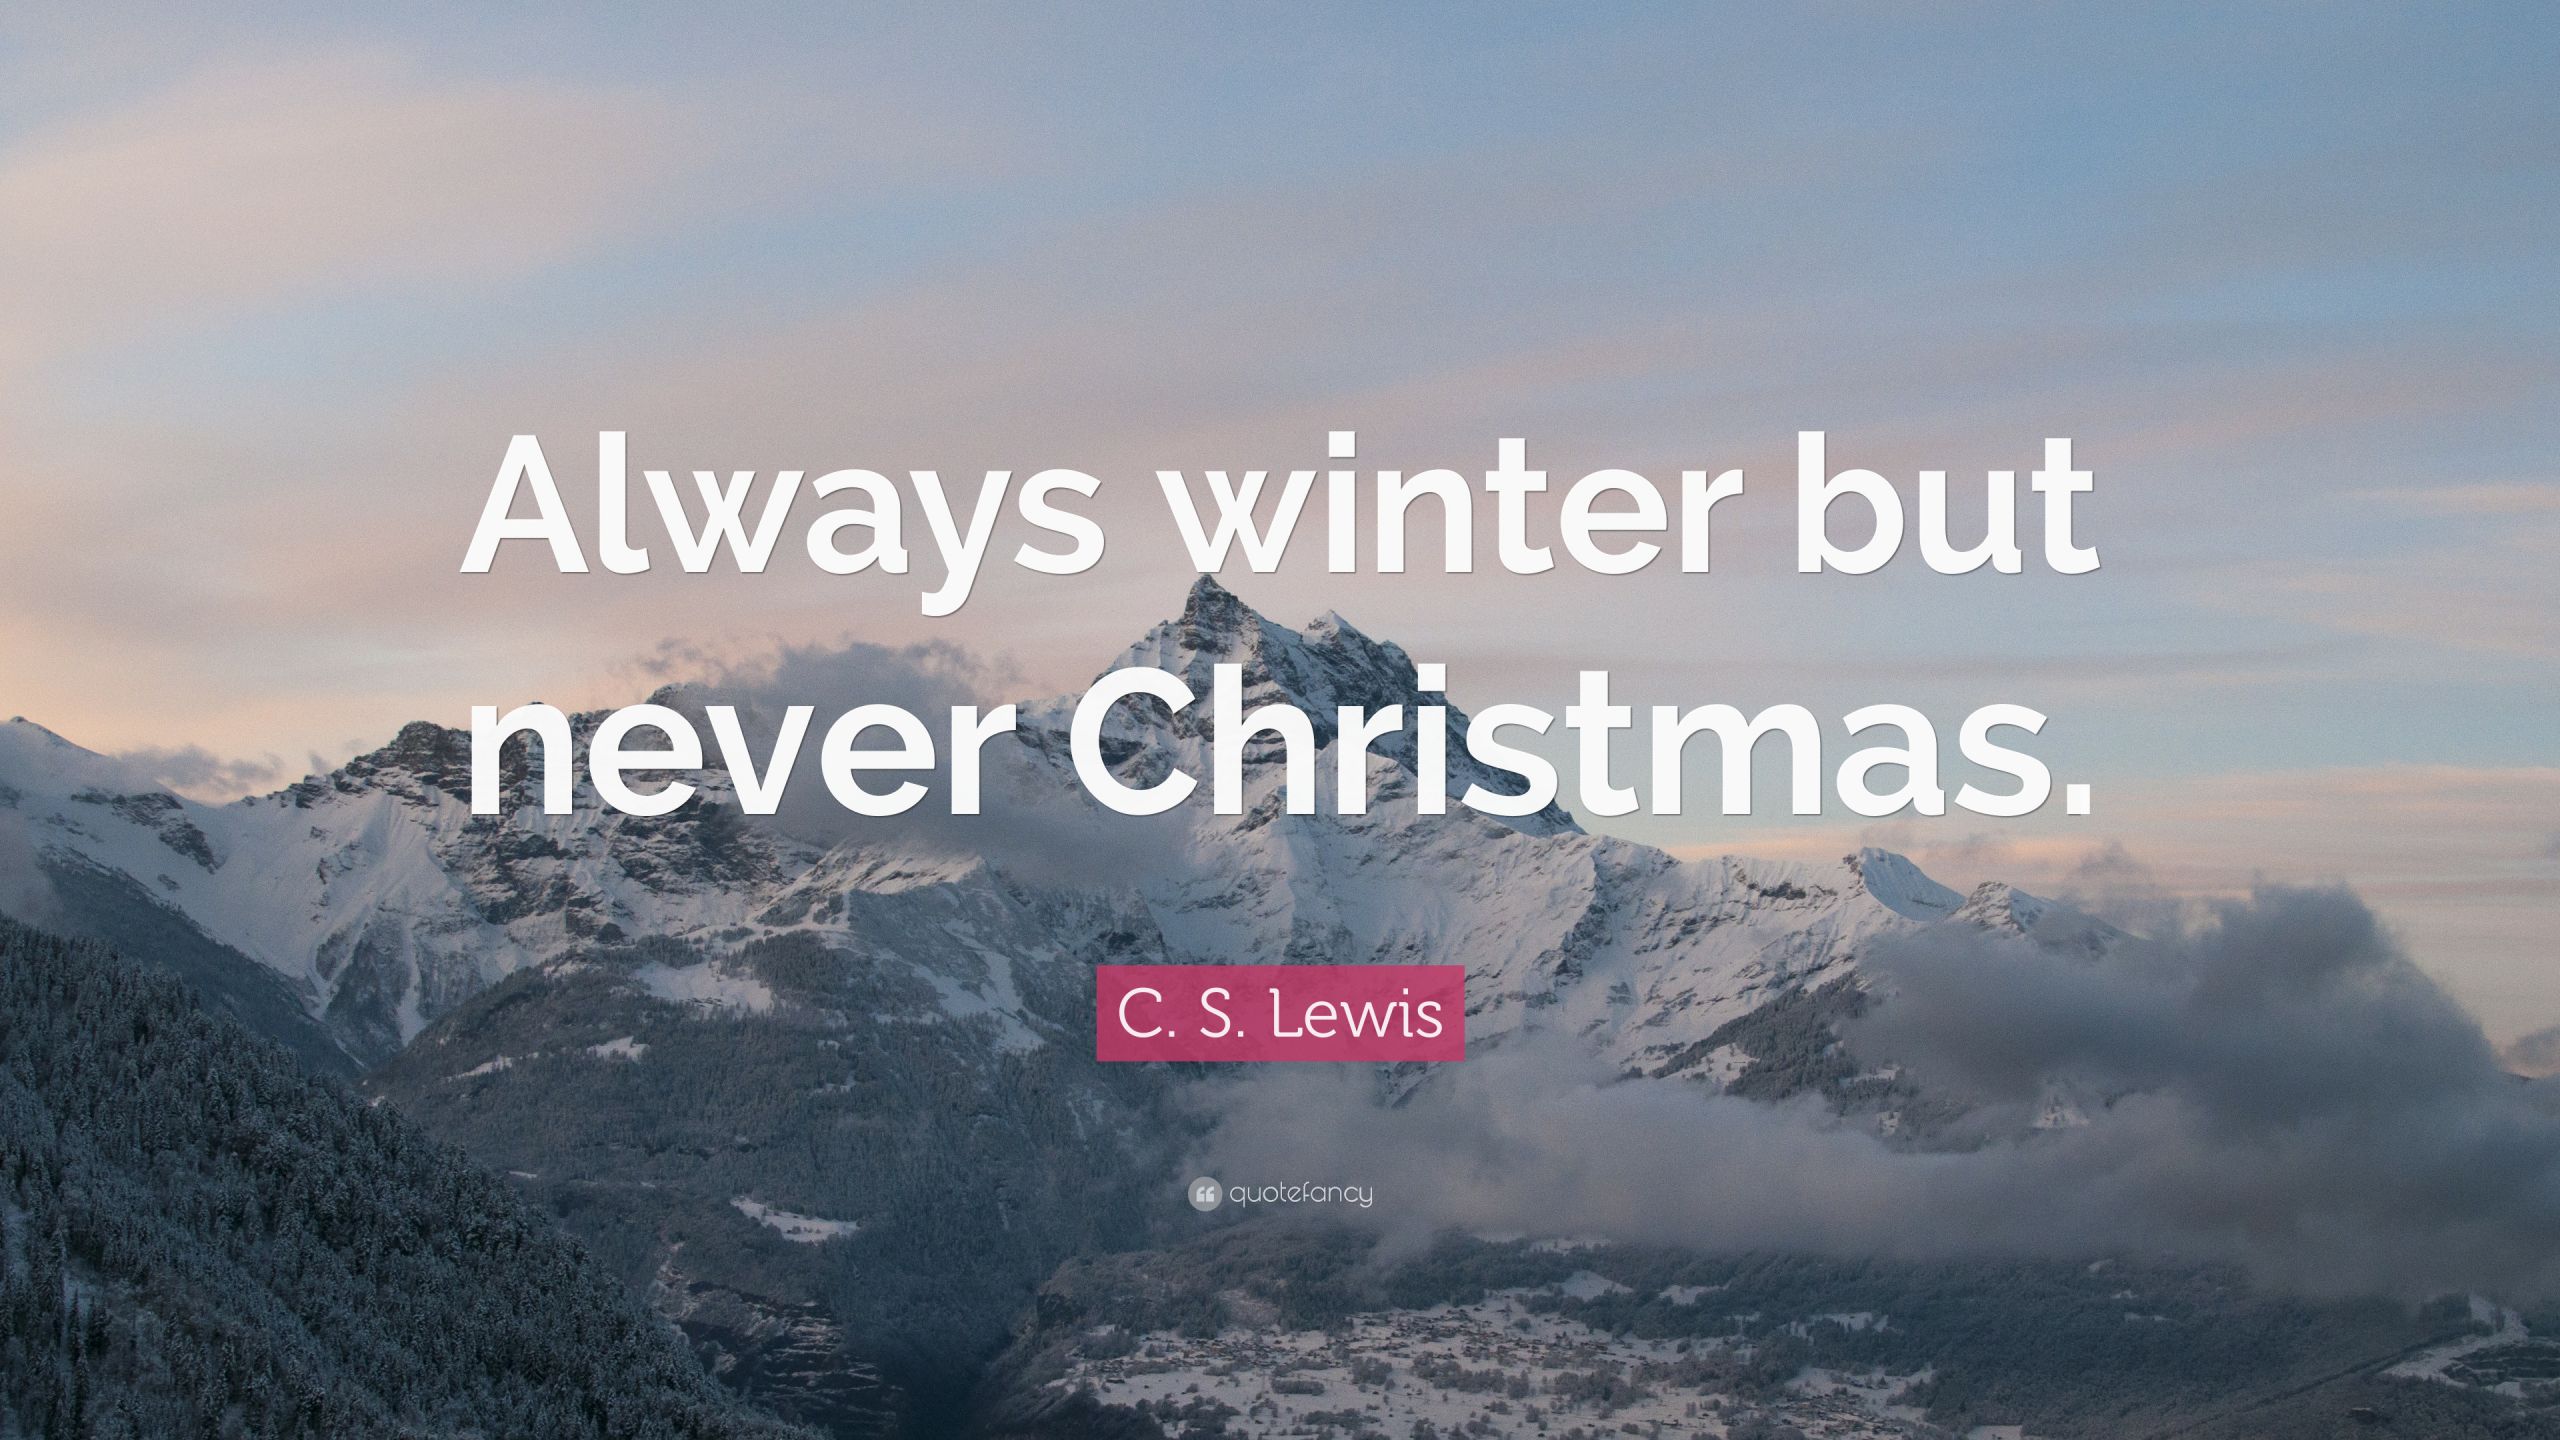 C.S Lewis Christmas Quotes
 C S Lewis Quote “Always winter but never Christmas